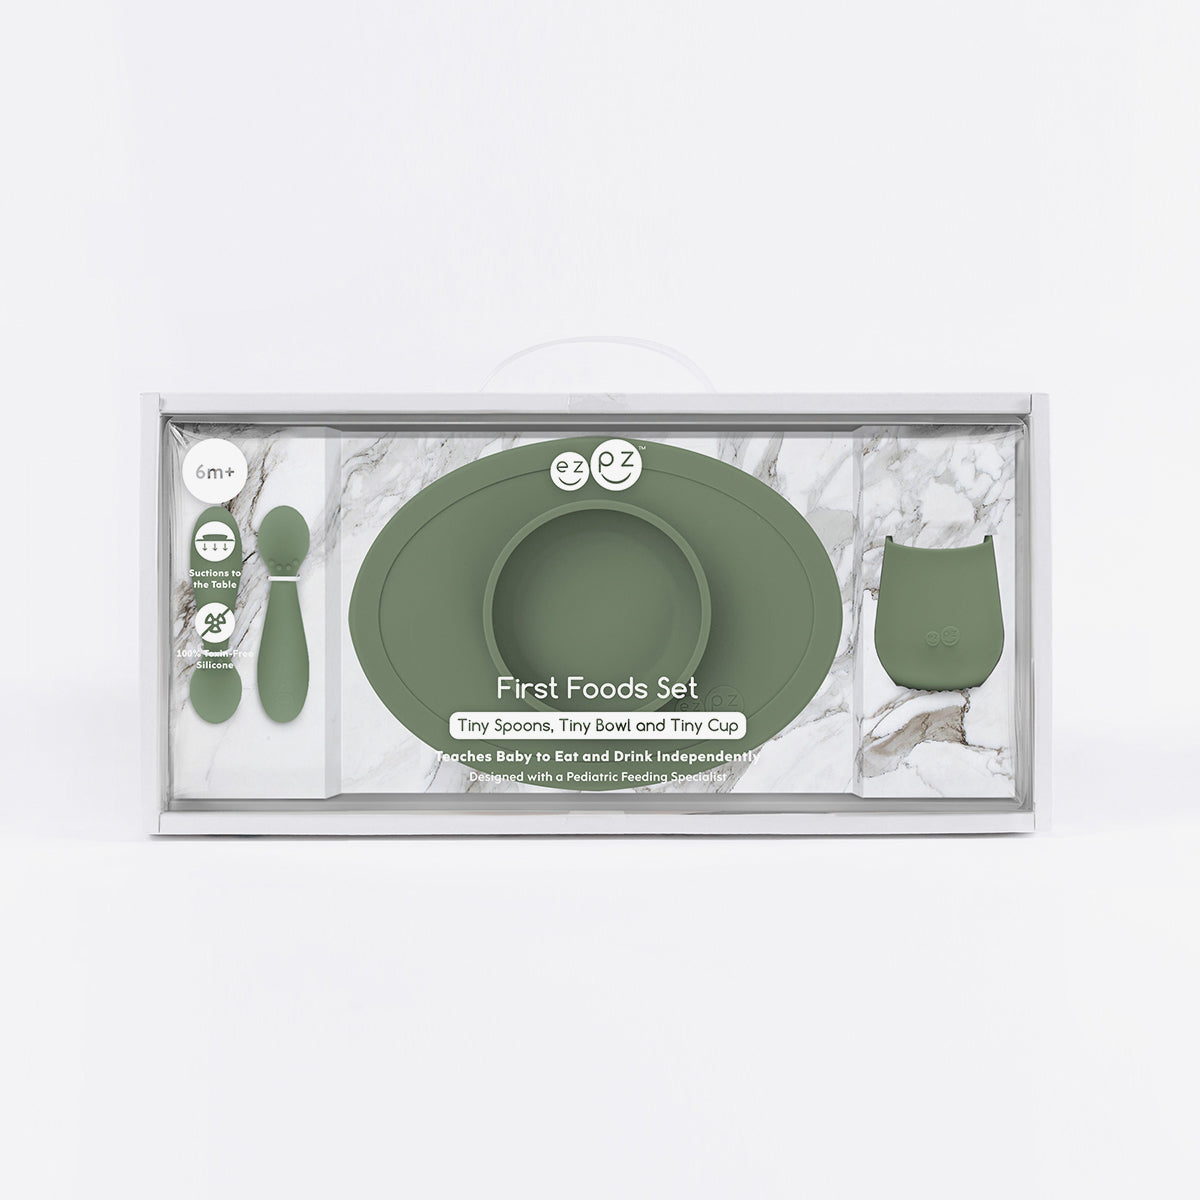 First Foods Set in Olive by ezpz / The Original All-In-One Silicone Plates & Placemats that Stick to the Table